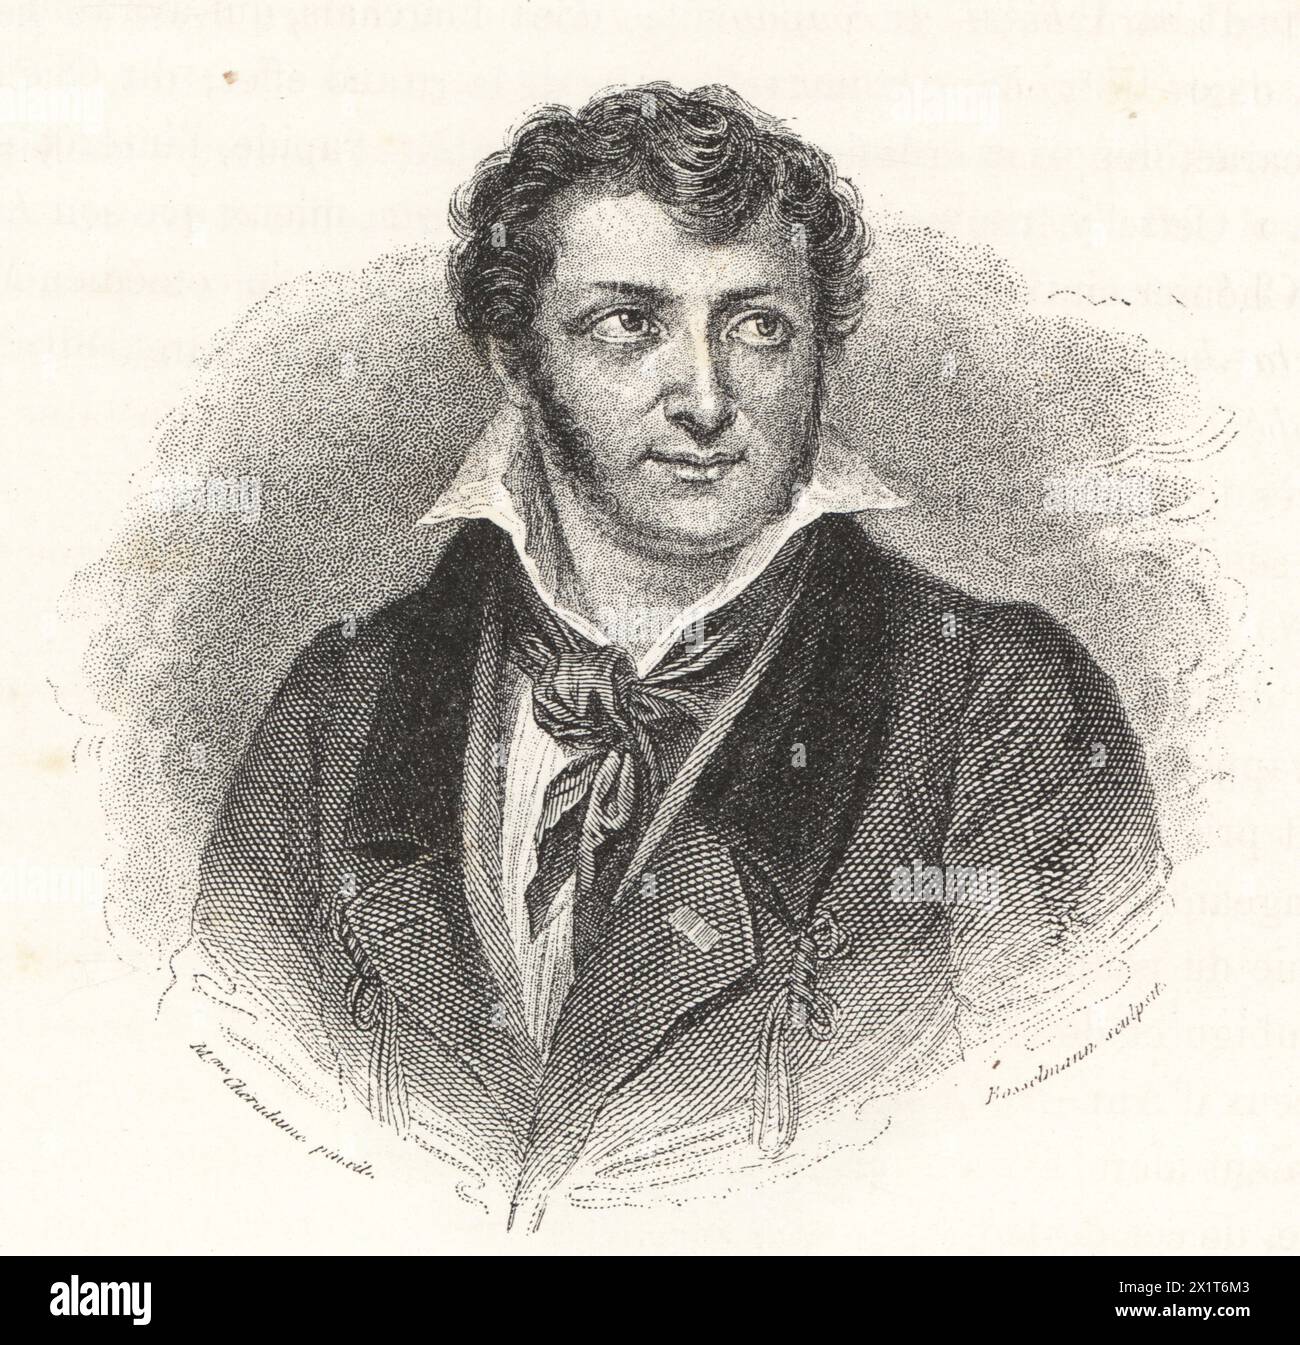 René-Charles Guilbert de Pixerécourt, French theatre director and playwright, 1773-1844. Engraving by Bosselmann after a portrait by Sophie Chéradame from Paul Lacroix's Directoire, Consulat et Empire, (Directory, Consulate and Empire), Paris, 1884. Stock Photo